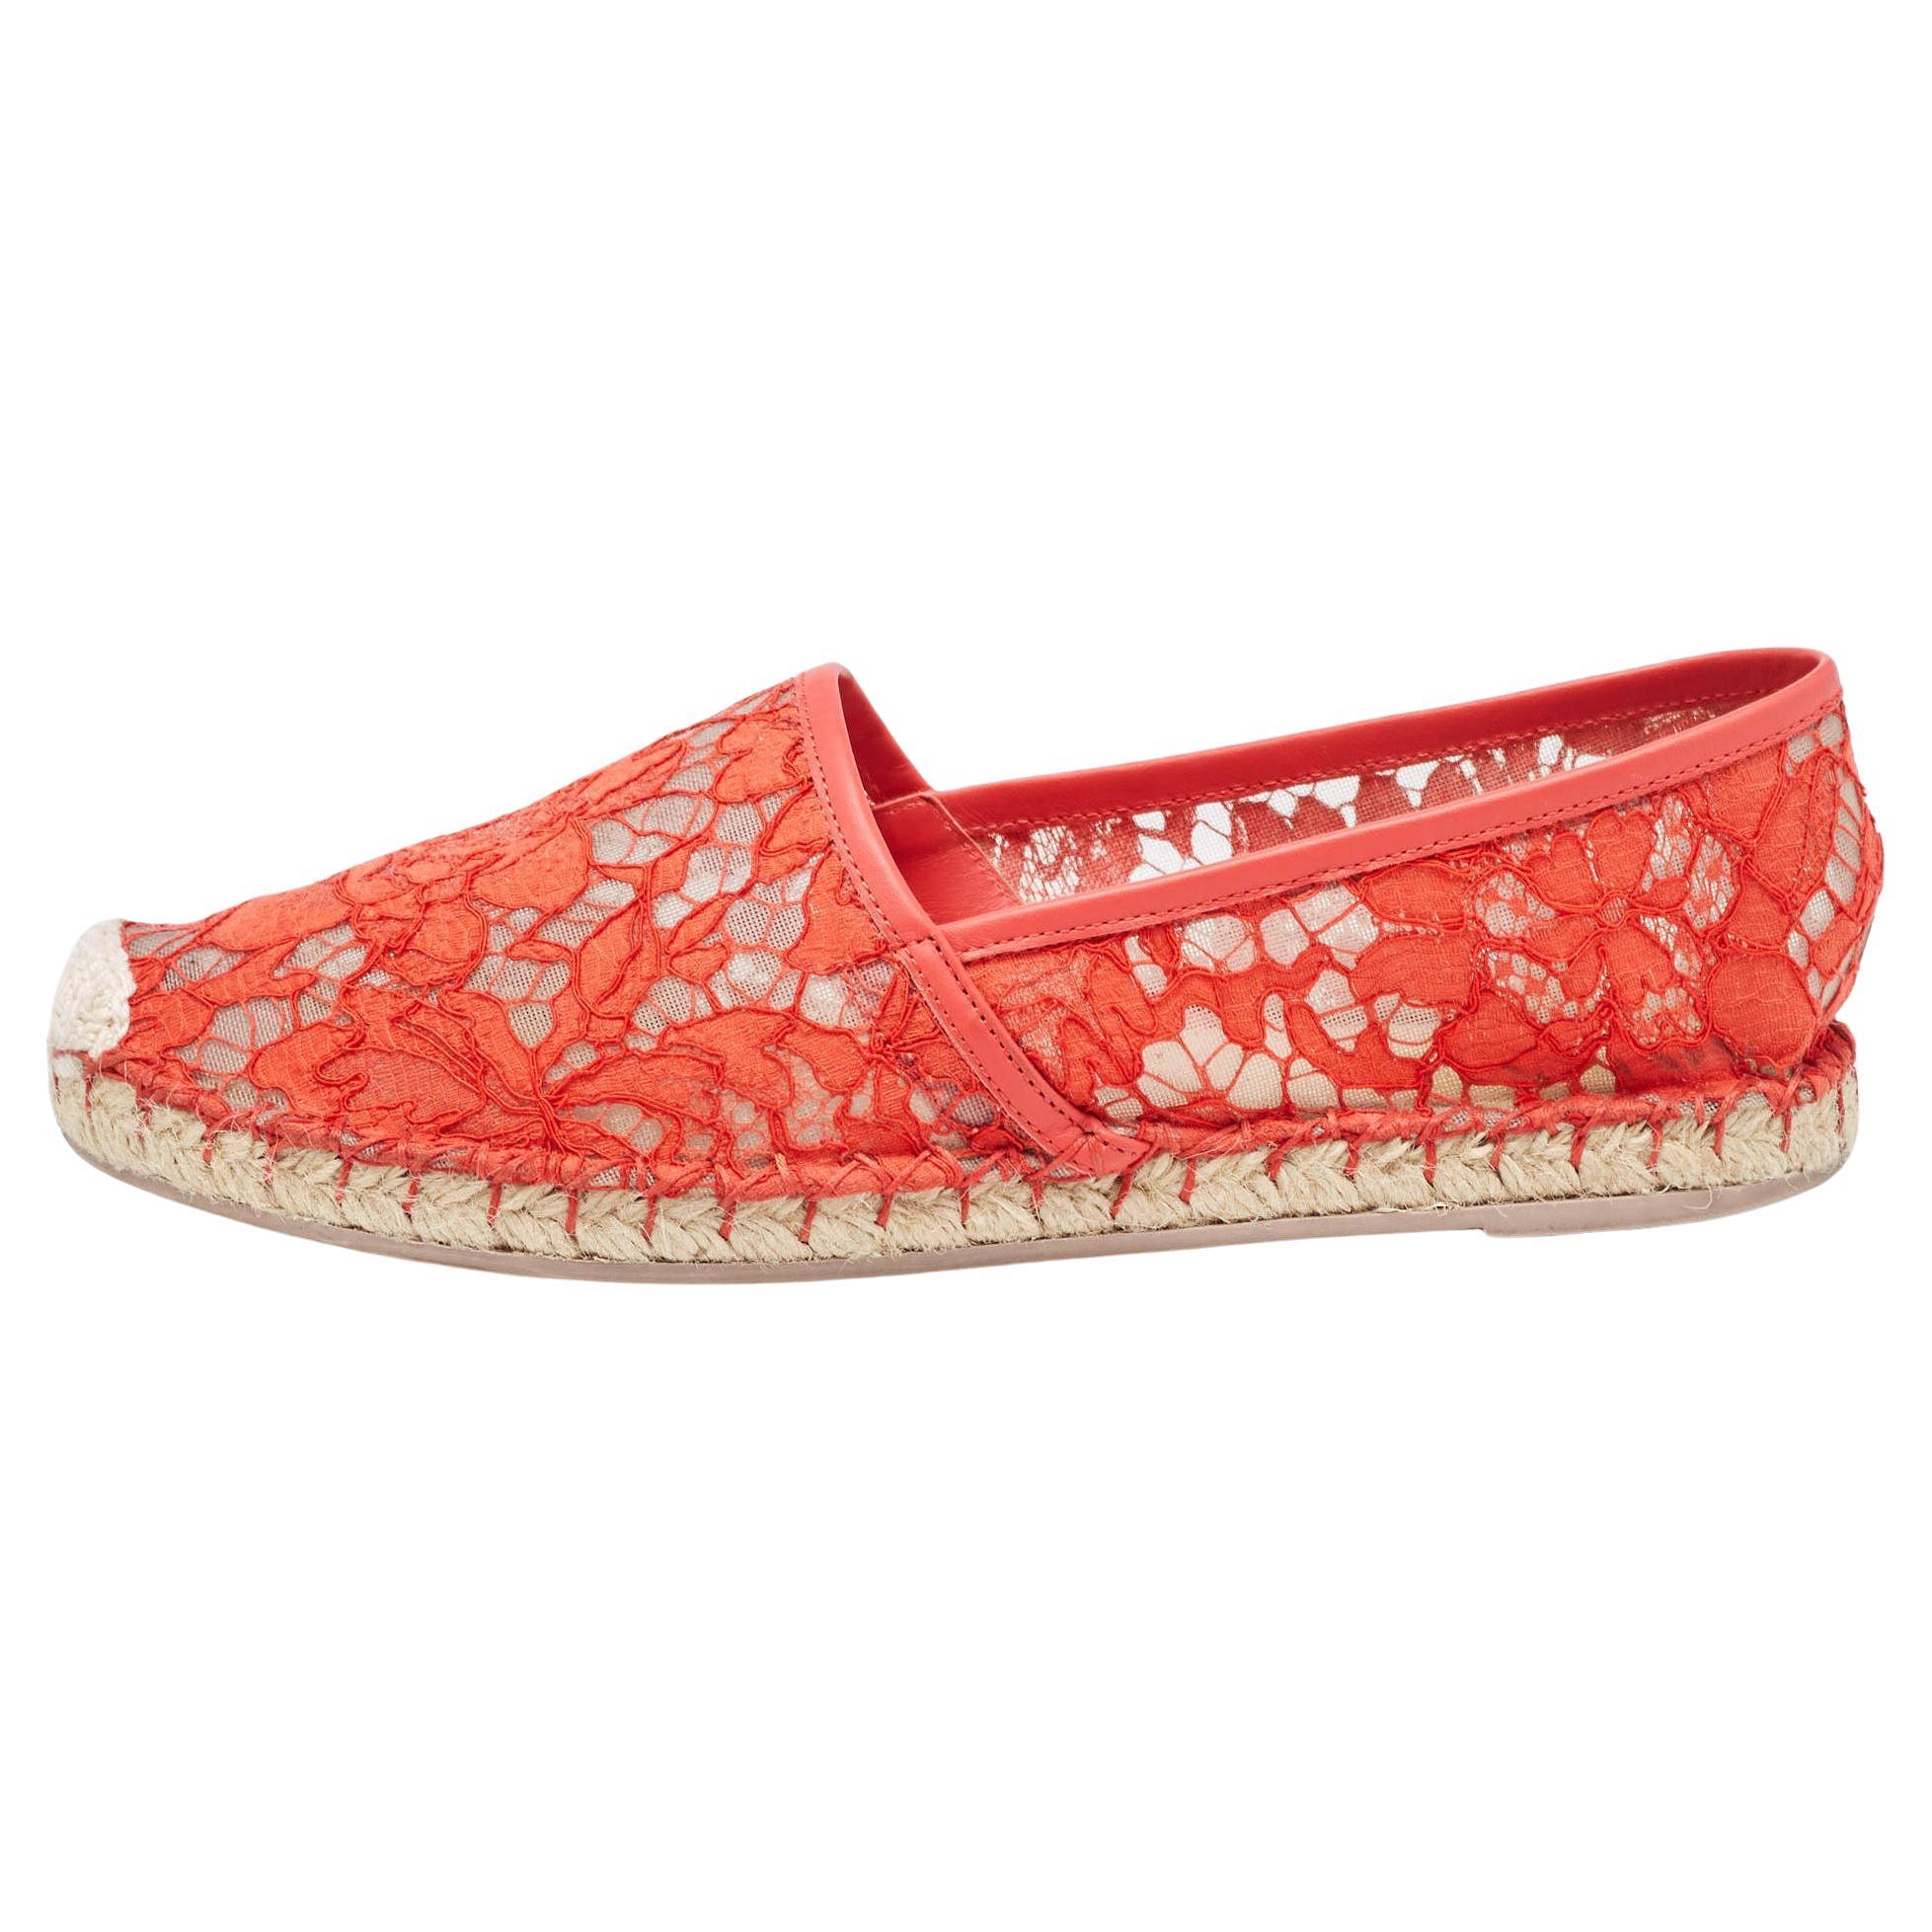 Valentino Red Lace and Leather Butterfly Espadrille Flats Size 39